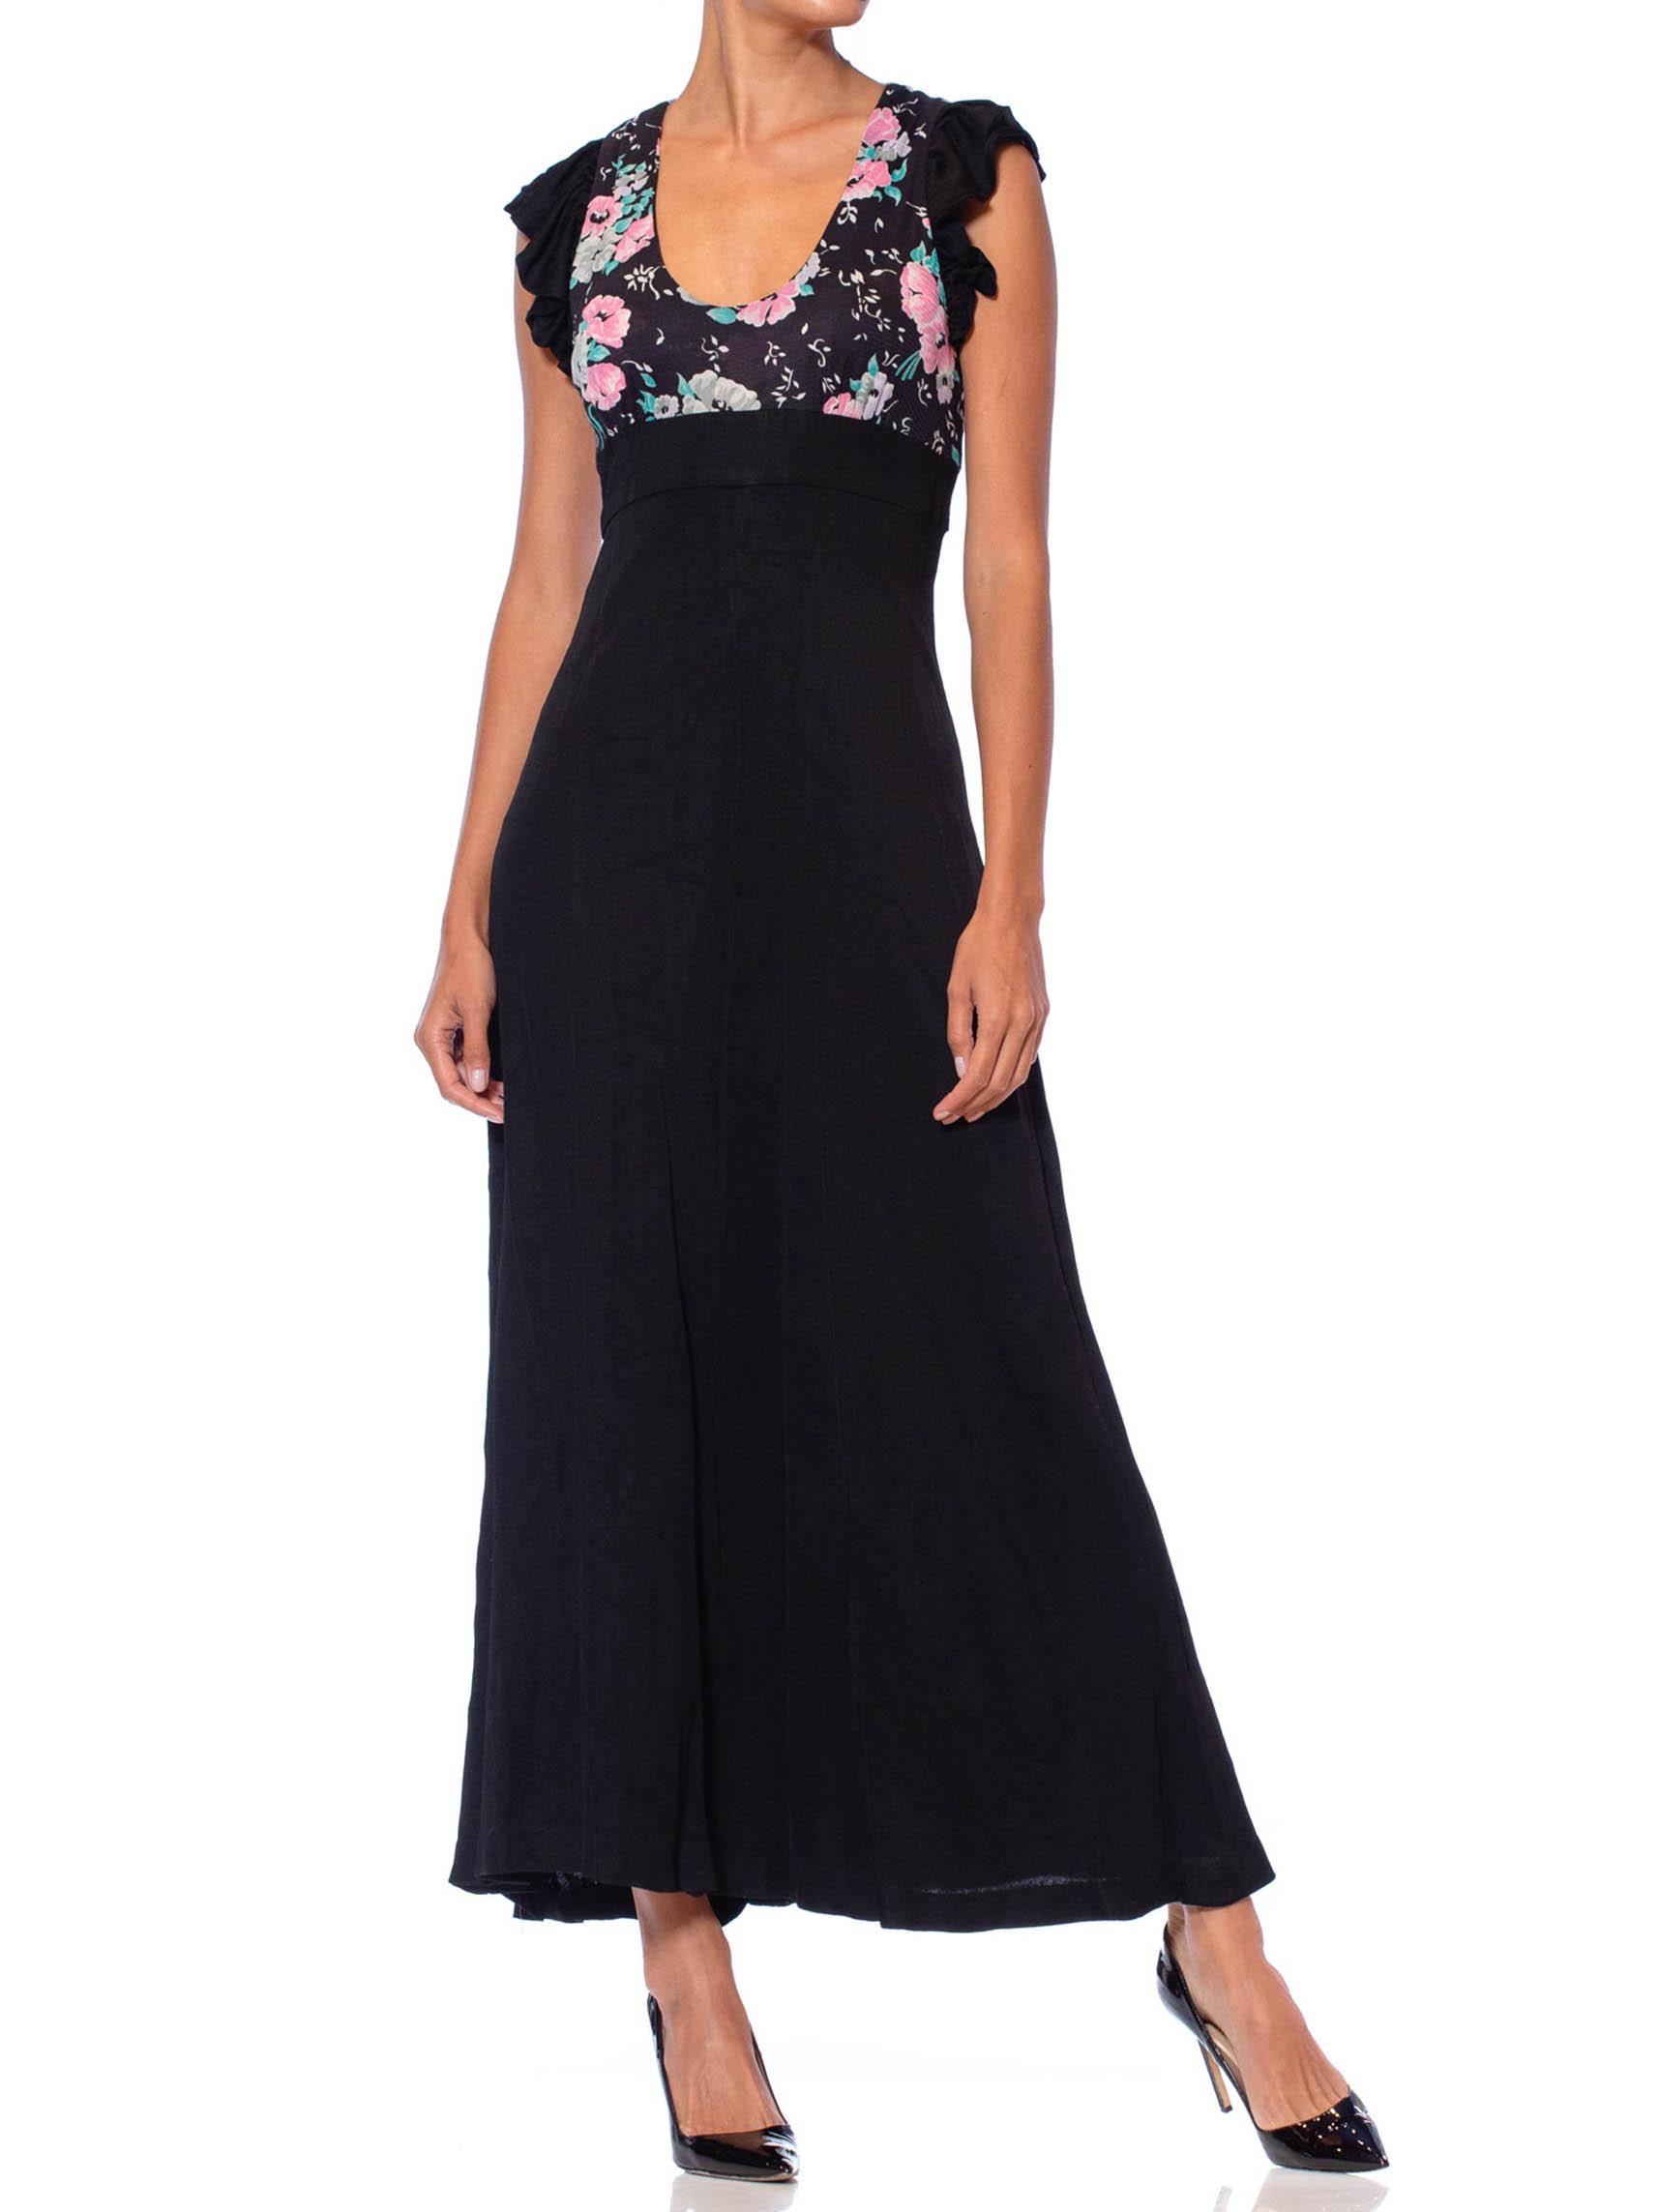 1970S Black & Floral Poly Blend Jersey Ruffled Maxi Dress With Tie Belt In Excellent Condition For Sale In New York, NY